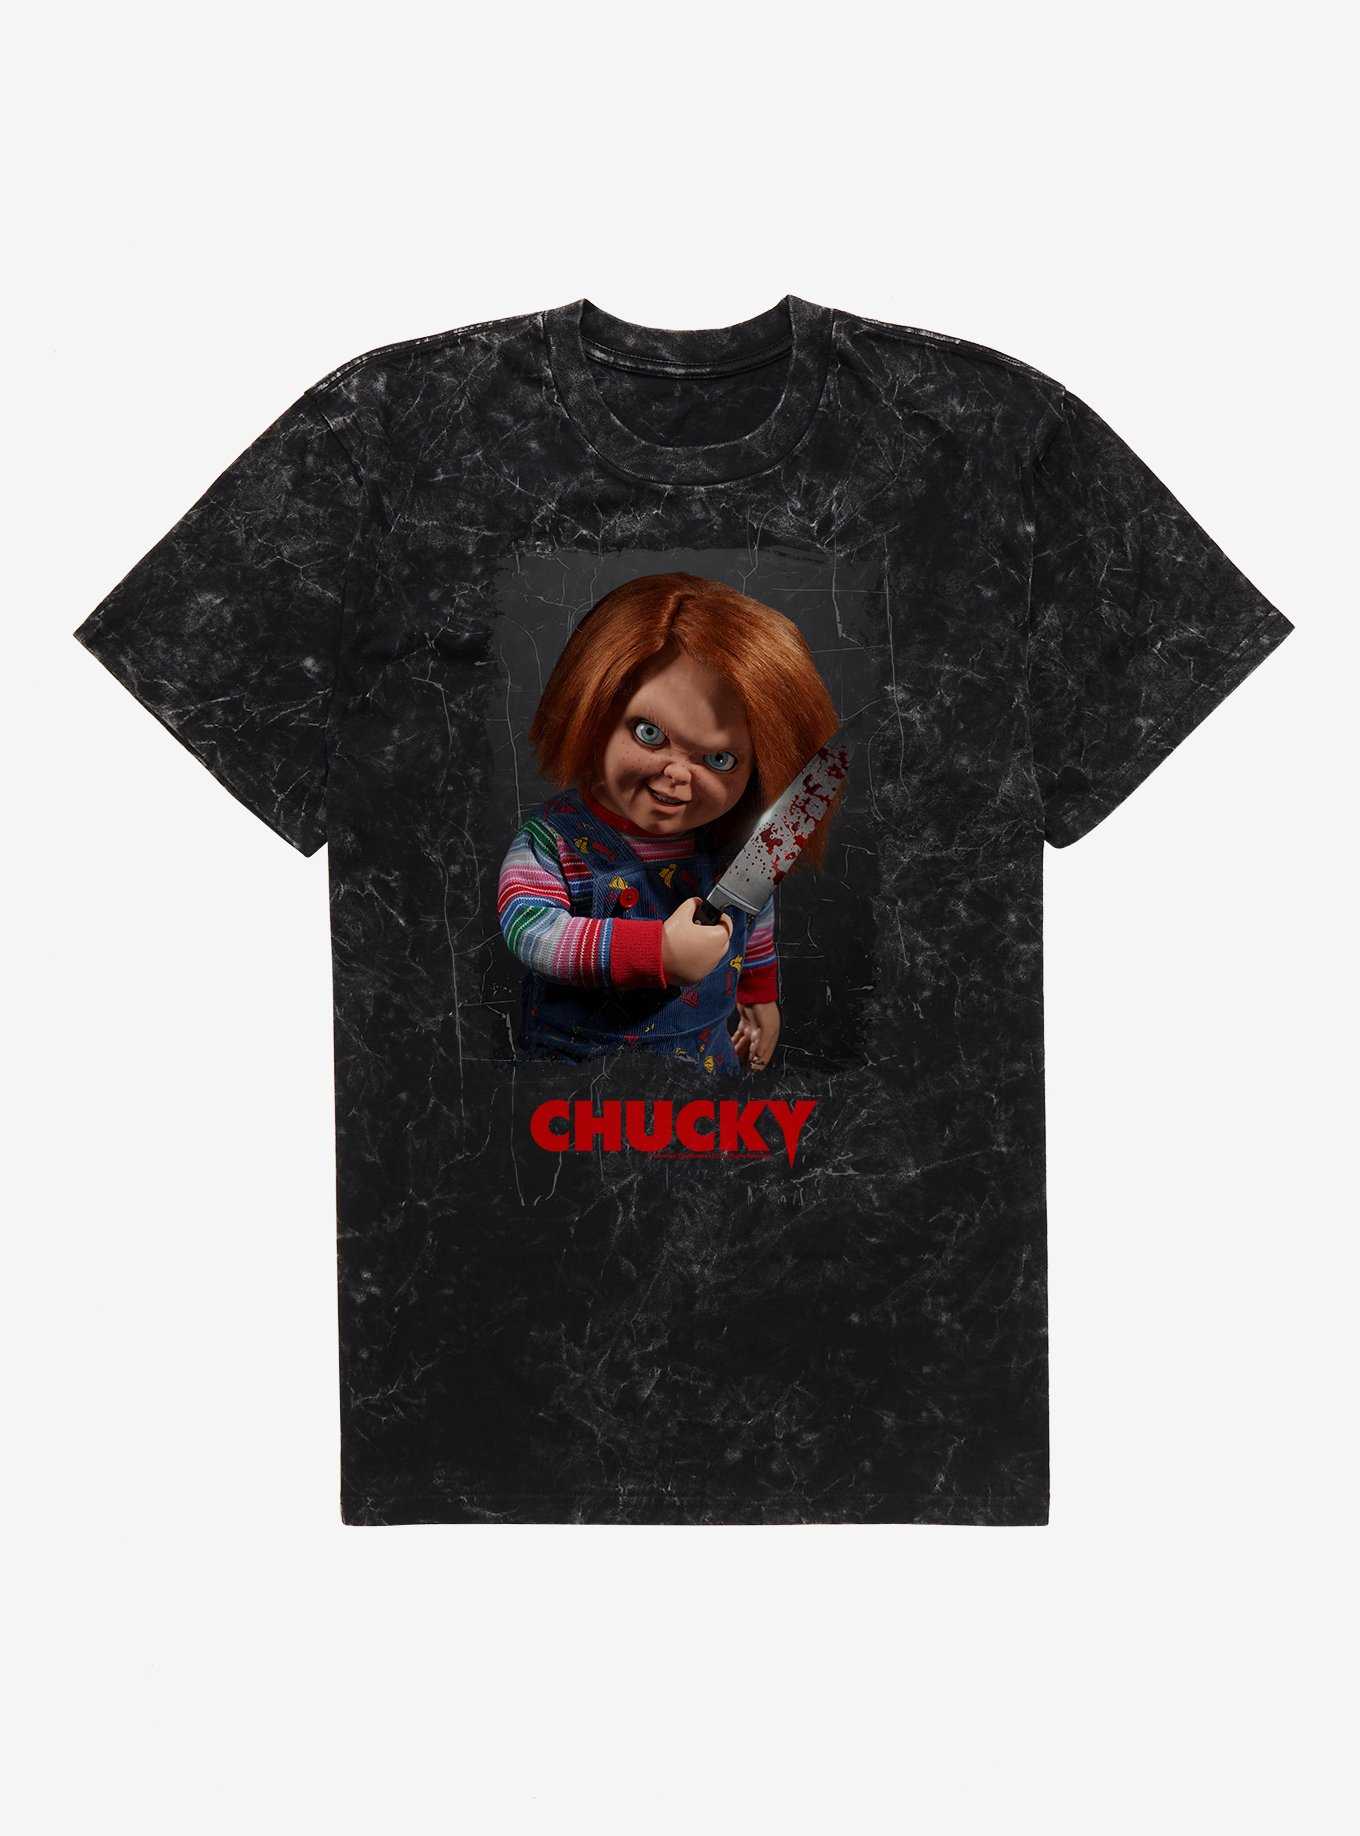 OFFICIAL Chucky Shirts, Merchandise & More